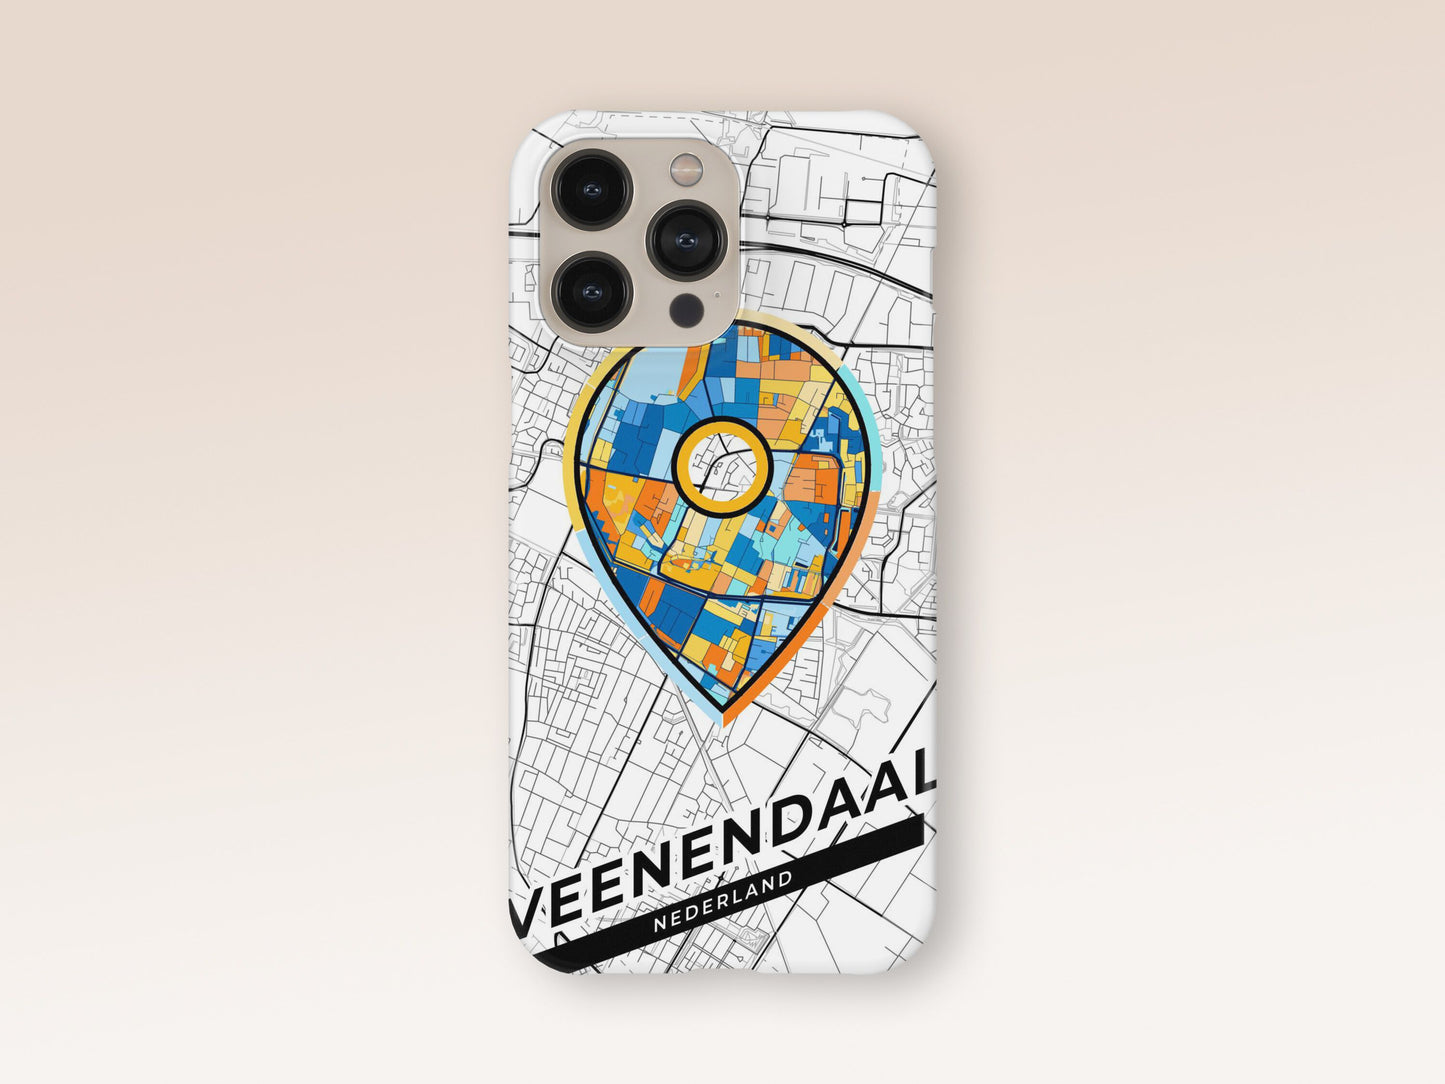 Veenendaal Netherlands slim phone case with colorful icon 1